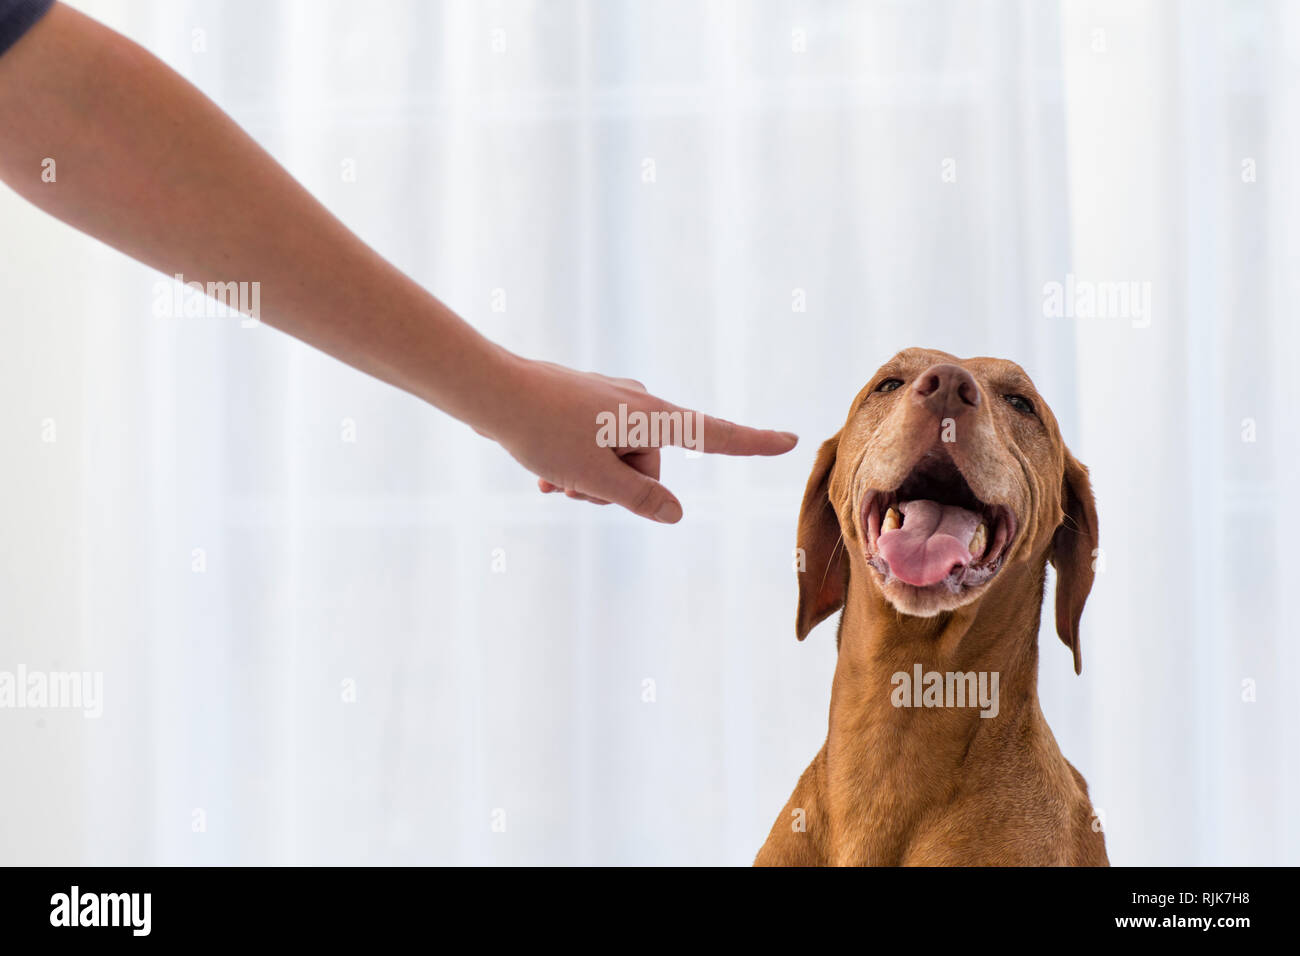 Arm pointing at dog in front of white curtains. Stock Photo